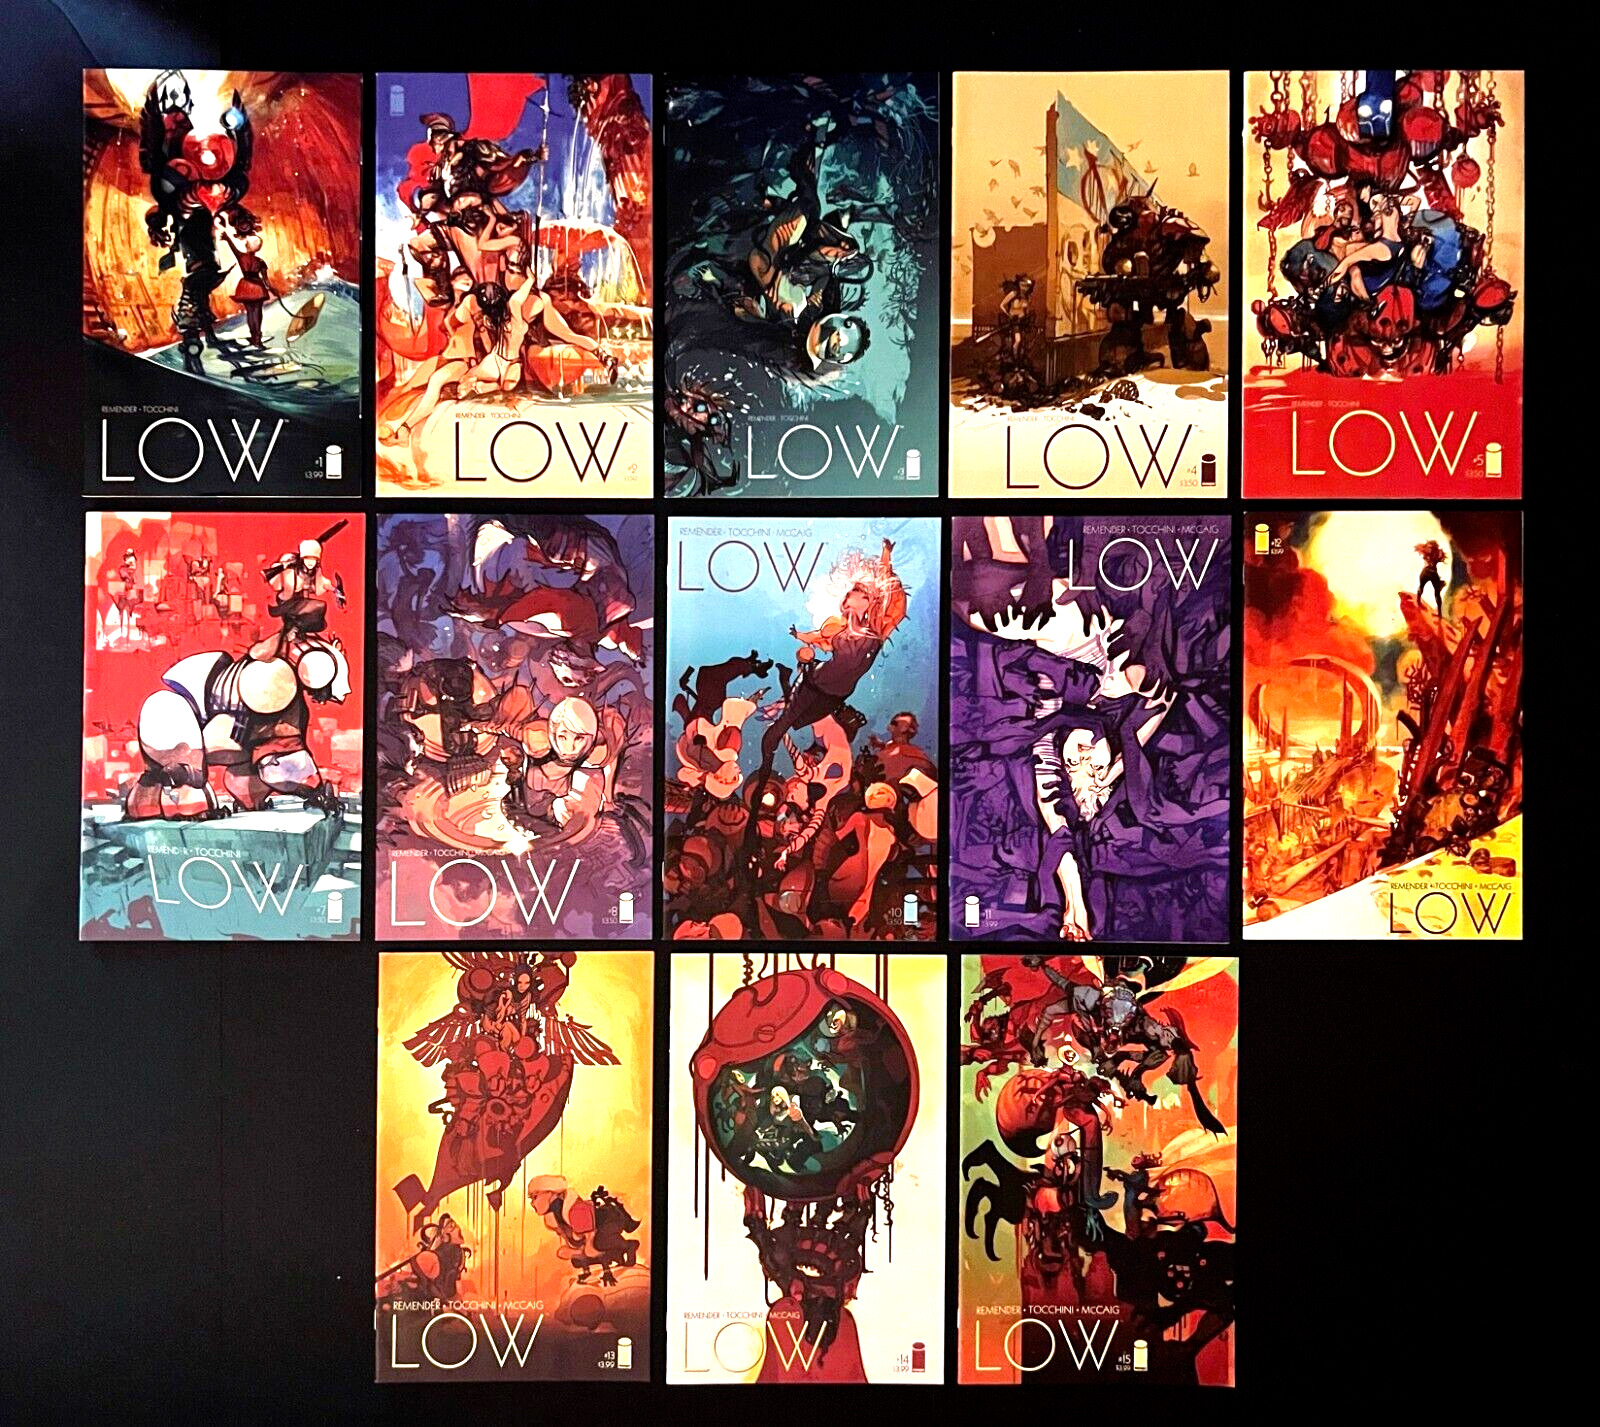 *Low* #1-5, 7, 8, 10-15 Hi-Grade Lot 13 Issues Remender & Tocchini Image 2014